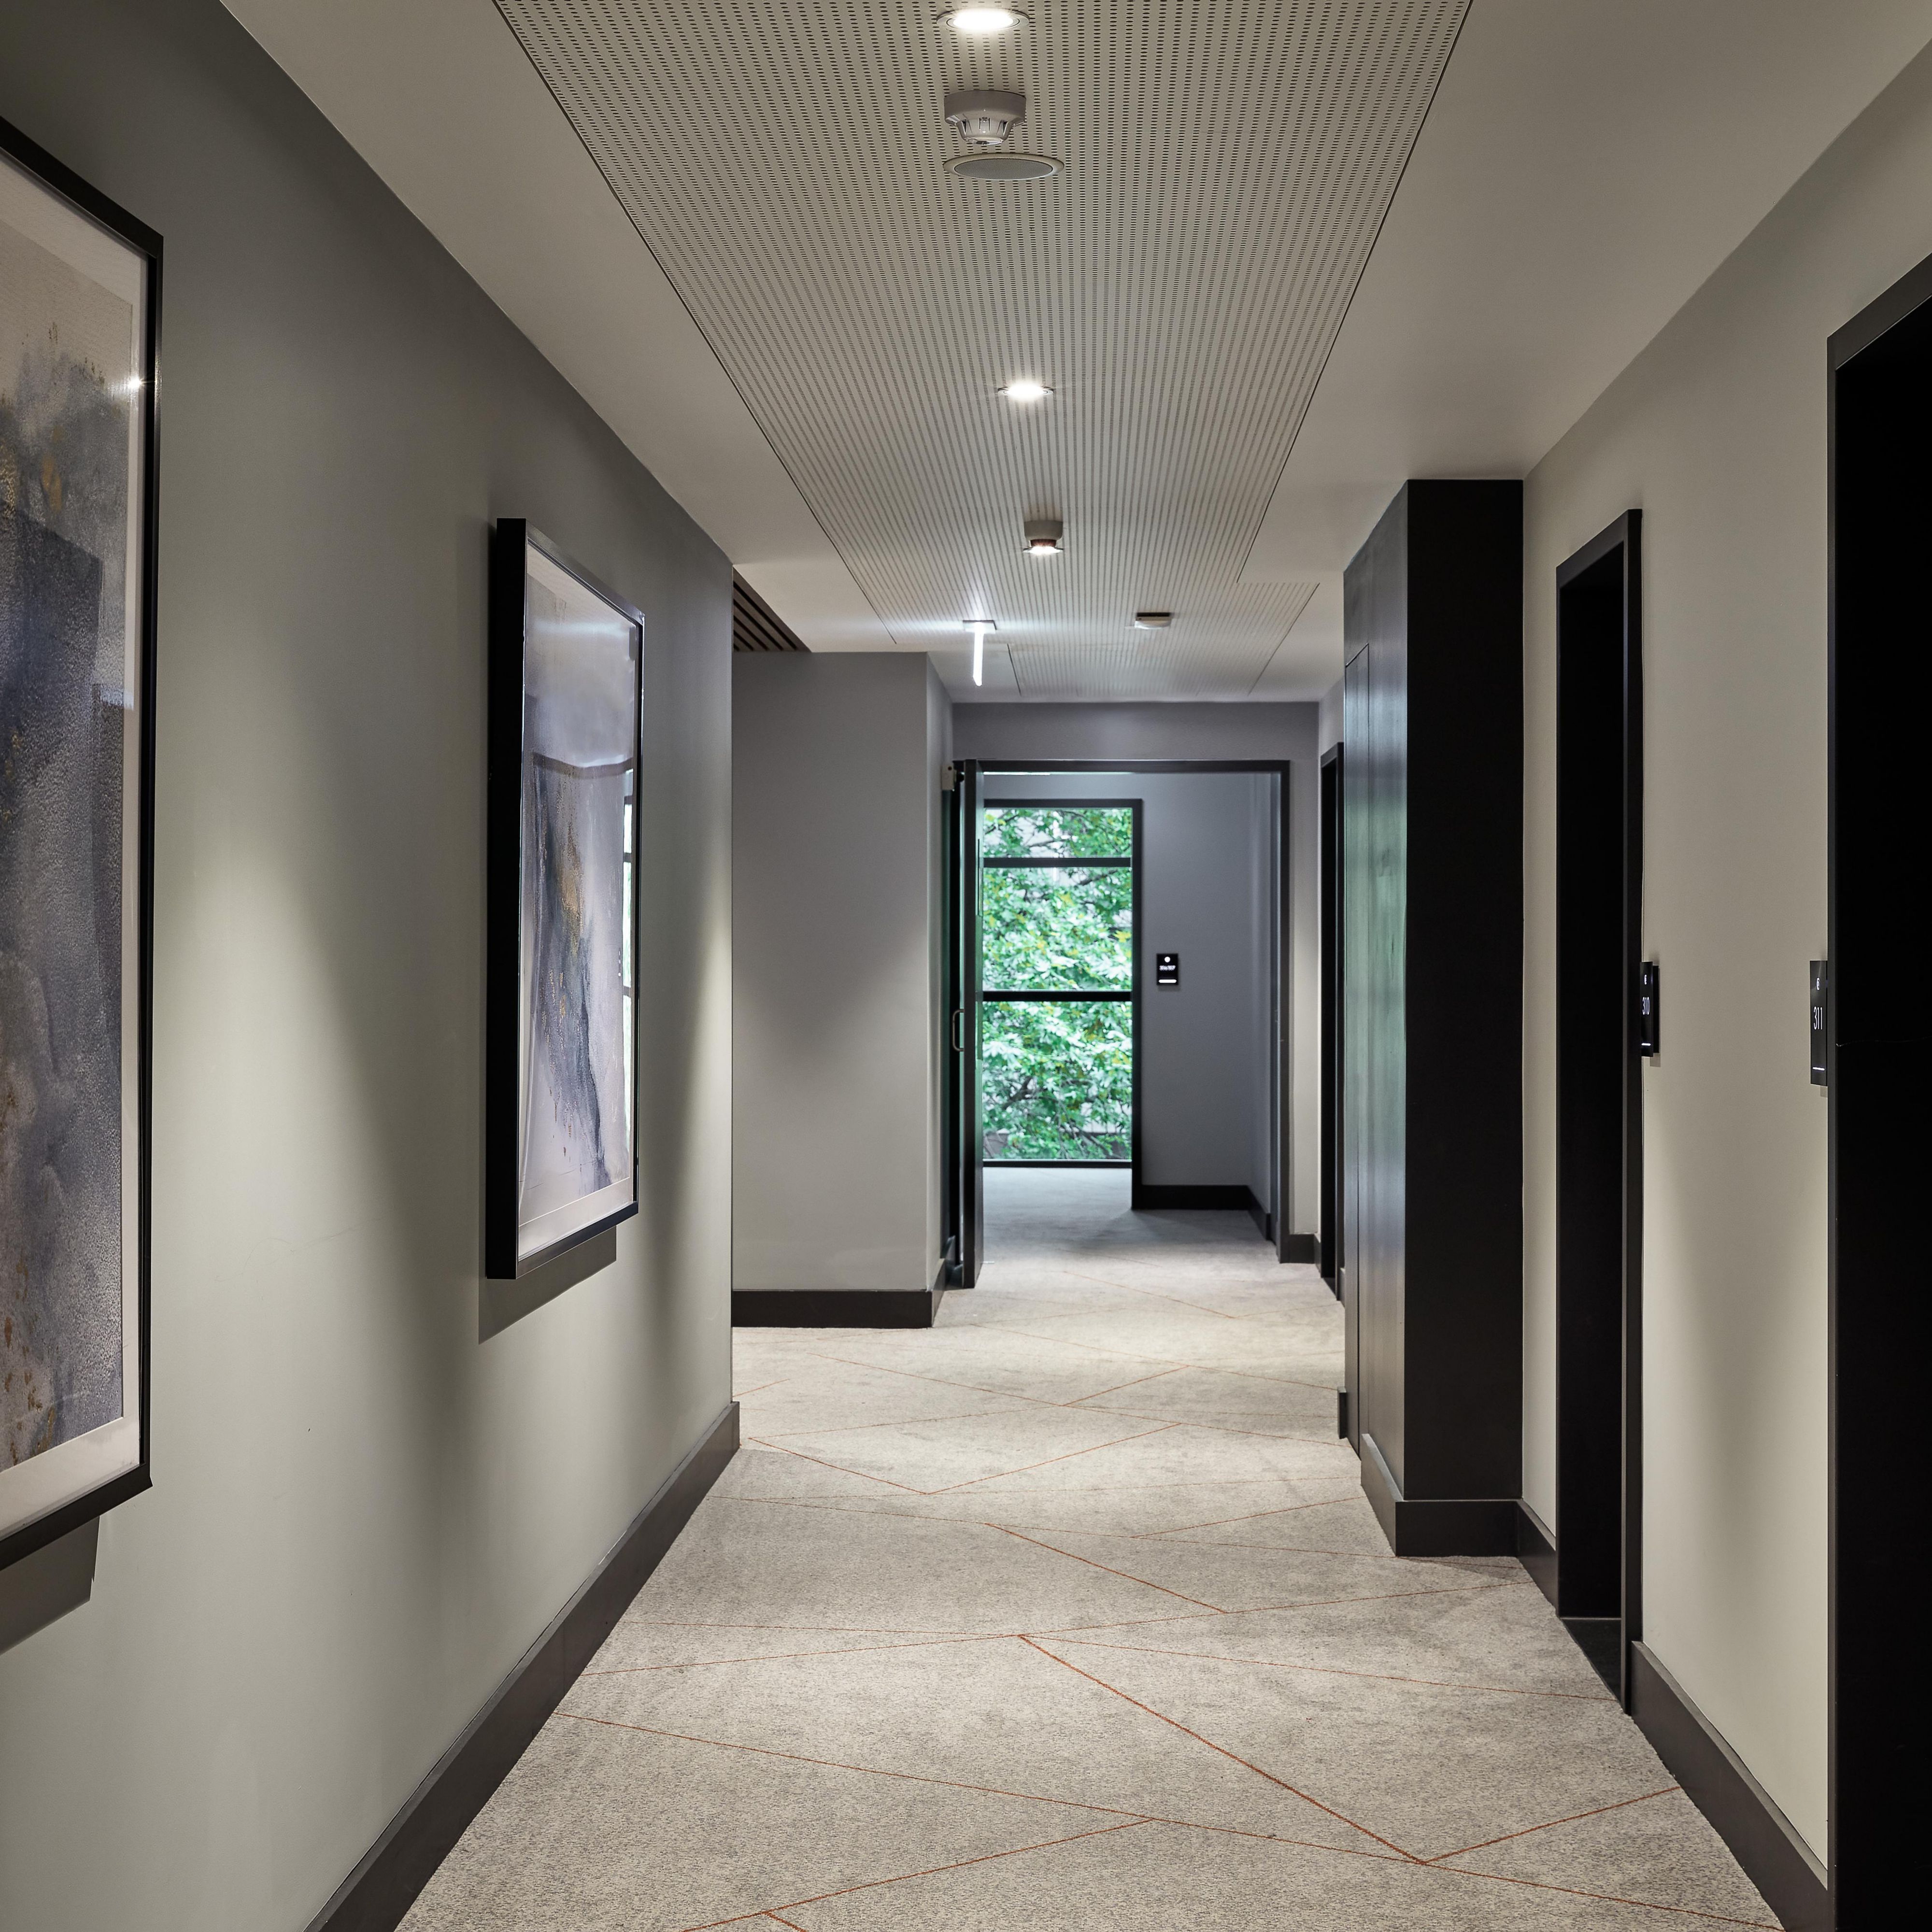 Acostic ceilings in guest hallways help with sound insulation